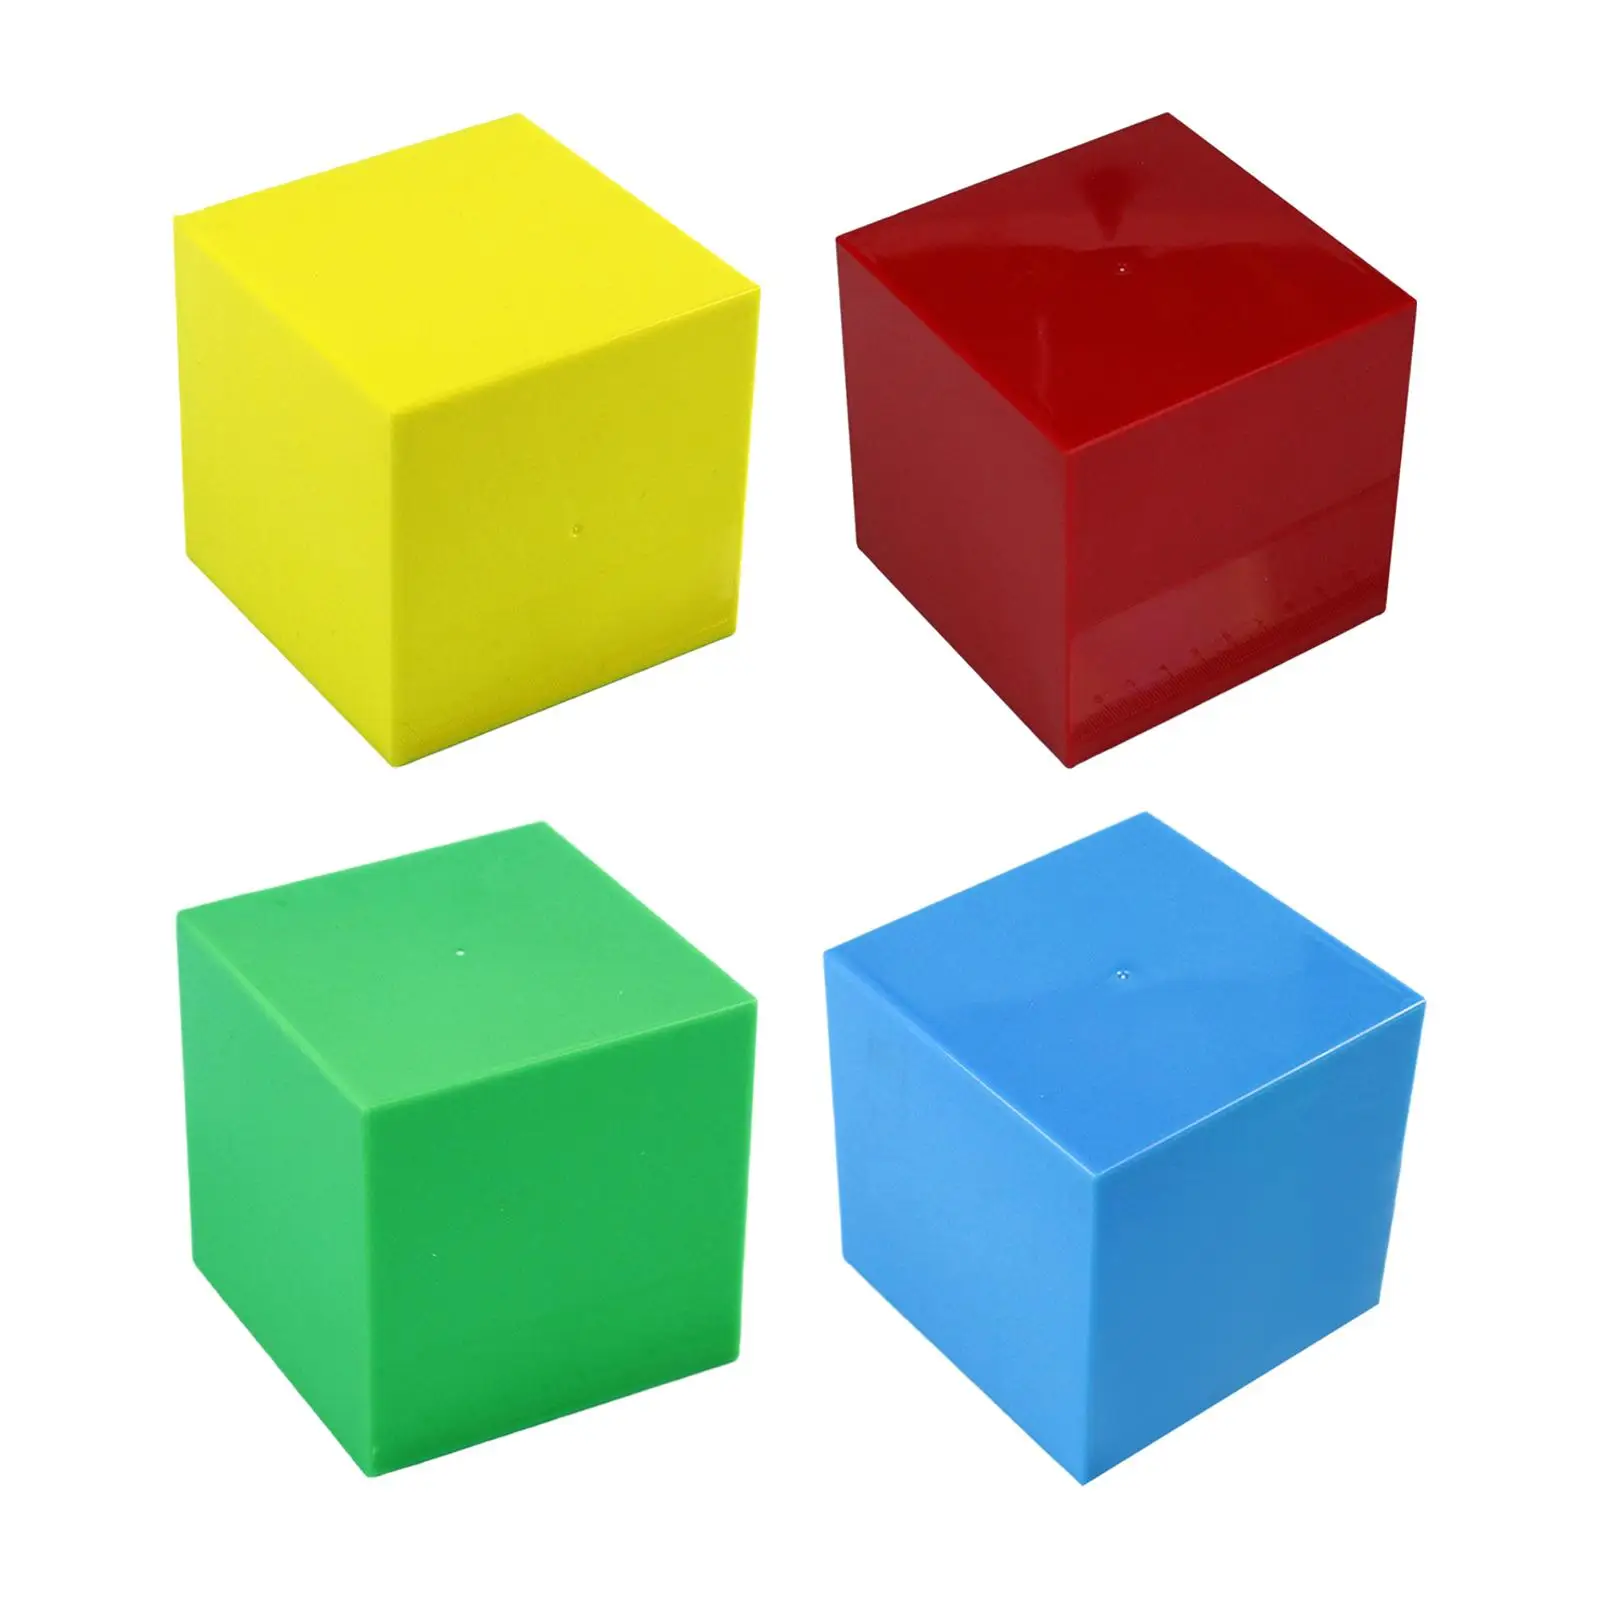 

Teaching Math Cube Kindergarten Preschool Learning Toy Learning Material Montessori Toy for Ages 2+ Children Boys Girls Kids